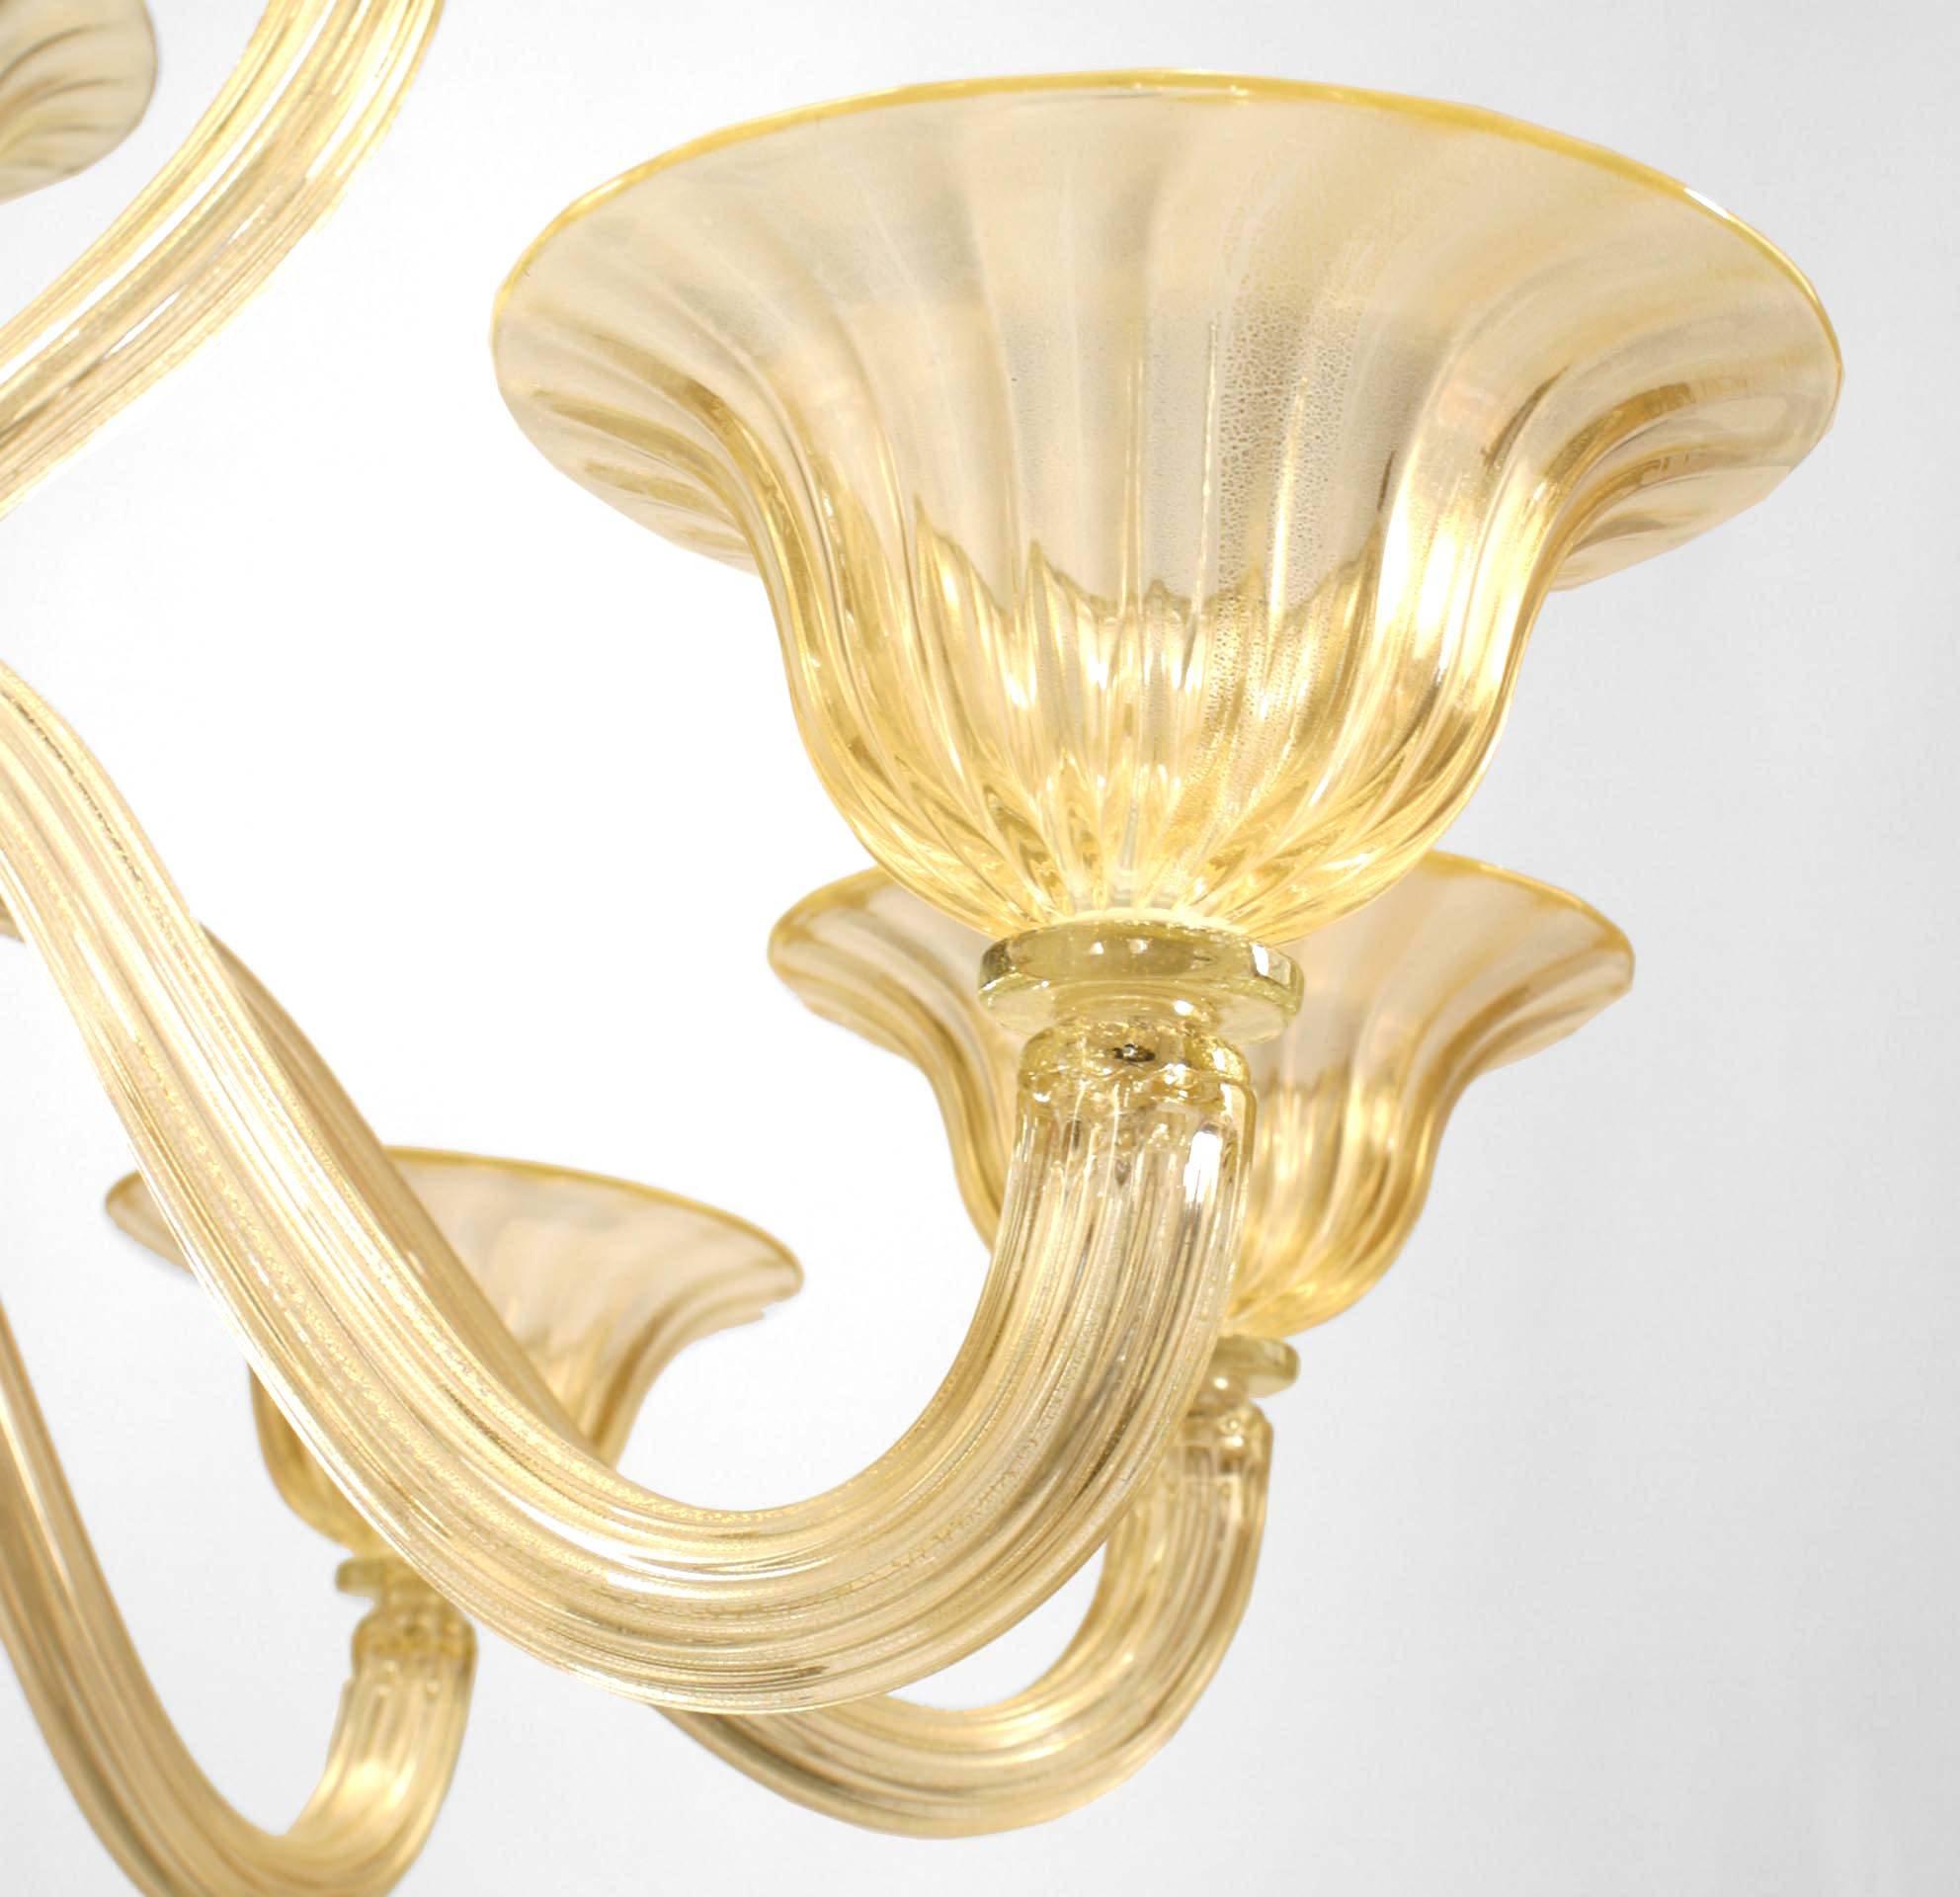 2 Italian Murano Sommerso Gold Dusted Glass Chandeliers In Good Condition For Sale In New York, NY